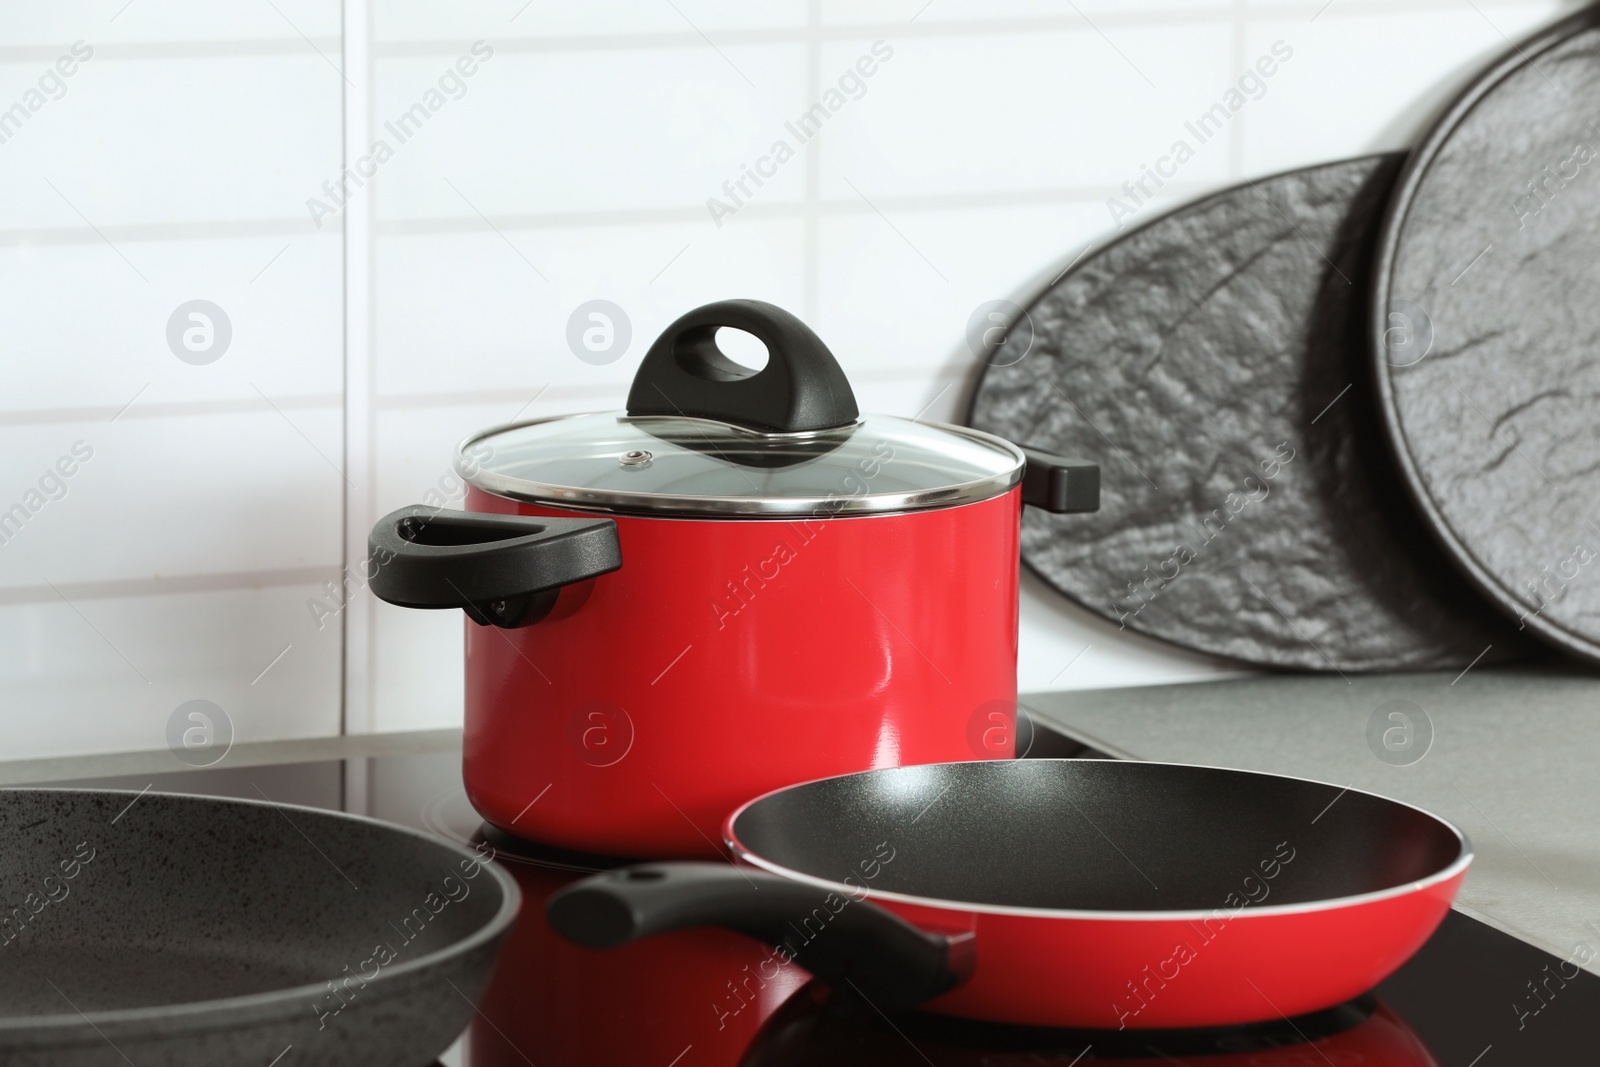 Photo of Set of clean cookware on stove in kitchen